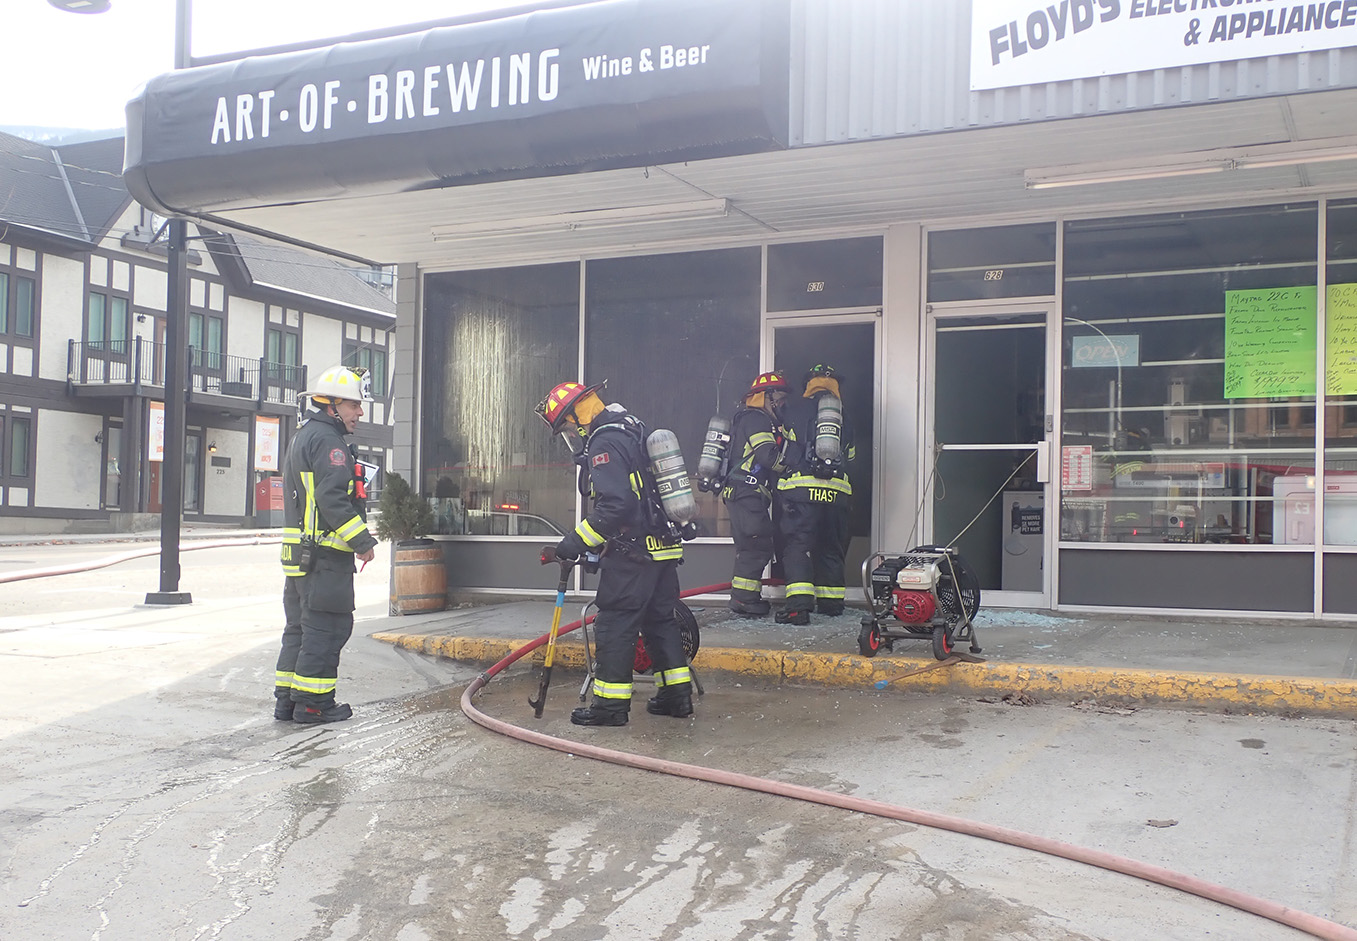 Nelson Fire and Rescue Services respond to fire at business in mini mall